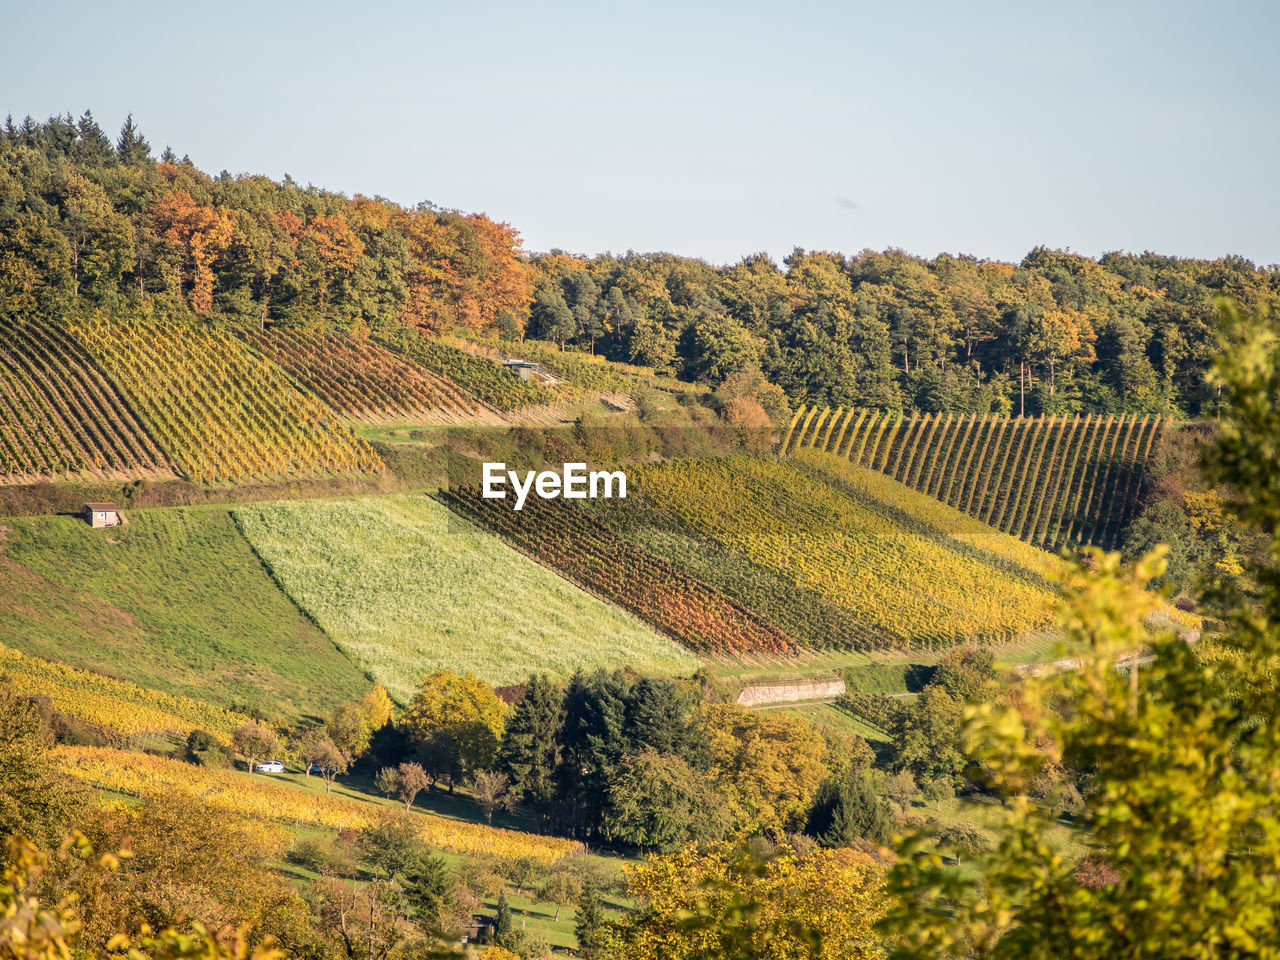 SCENIC VIEW OF VINEYARD DURING AUTUMN